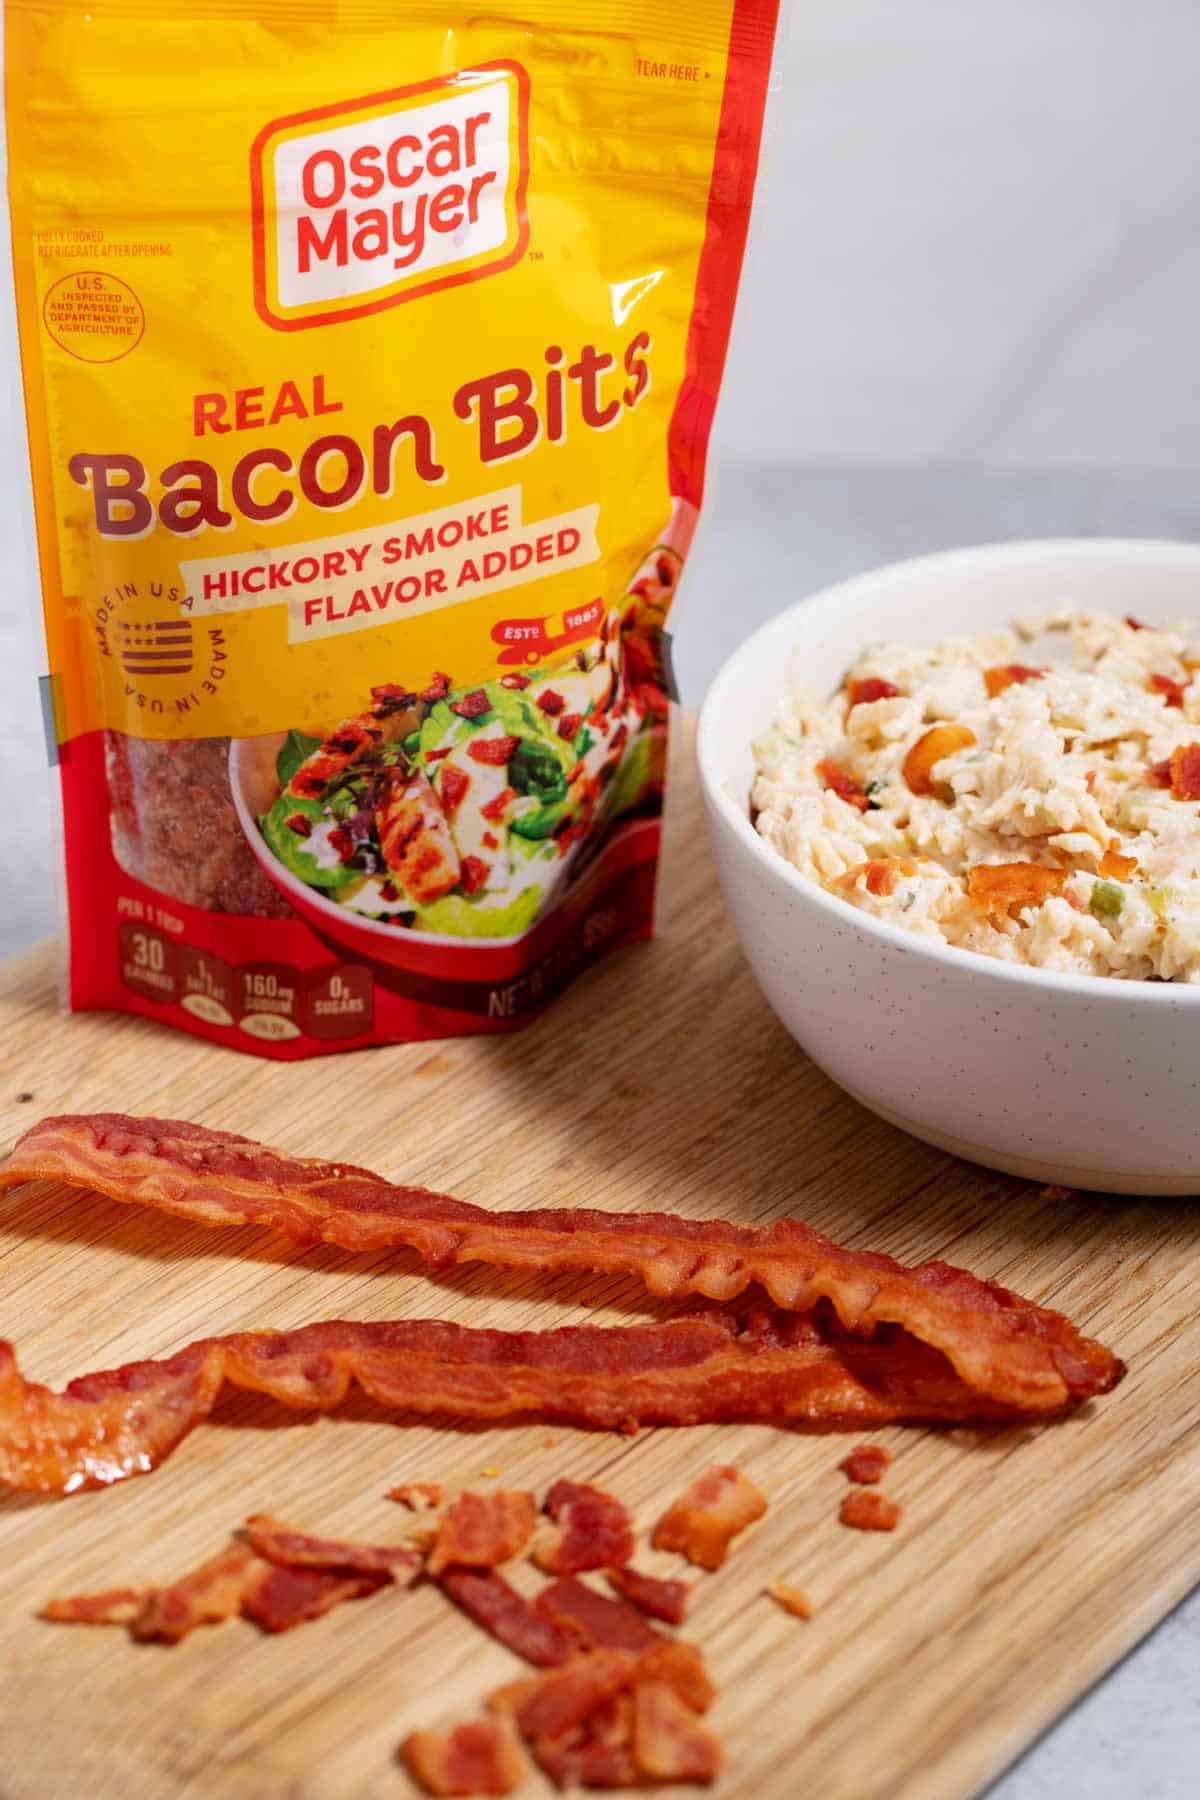 Crumbled bacon added to store-bought chicken salad to jazz it up.